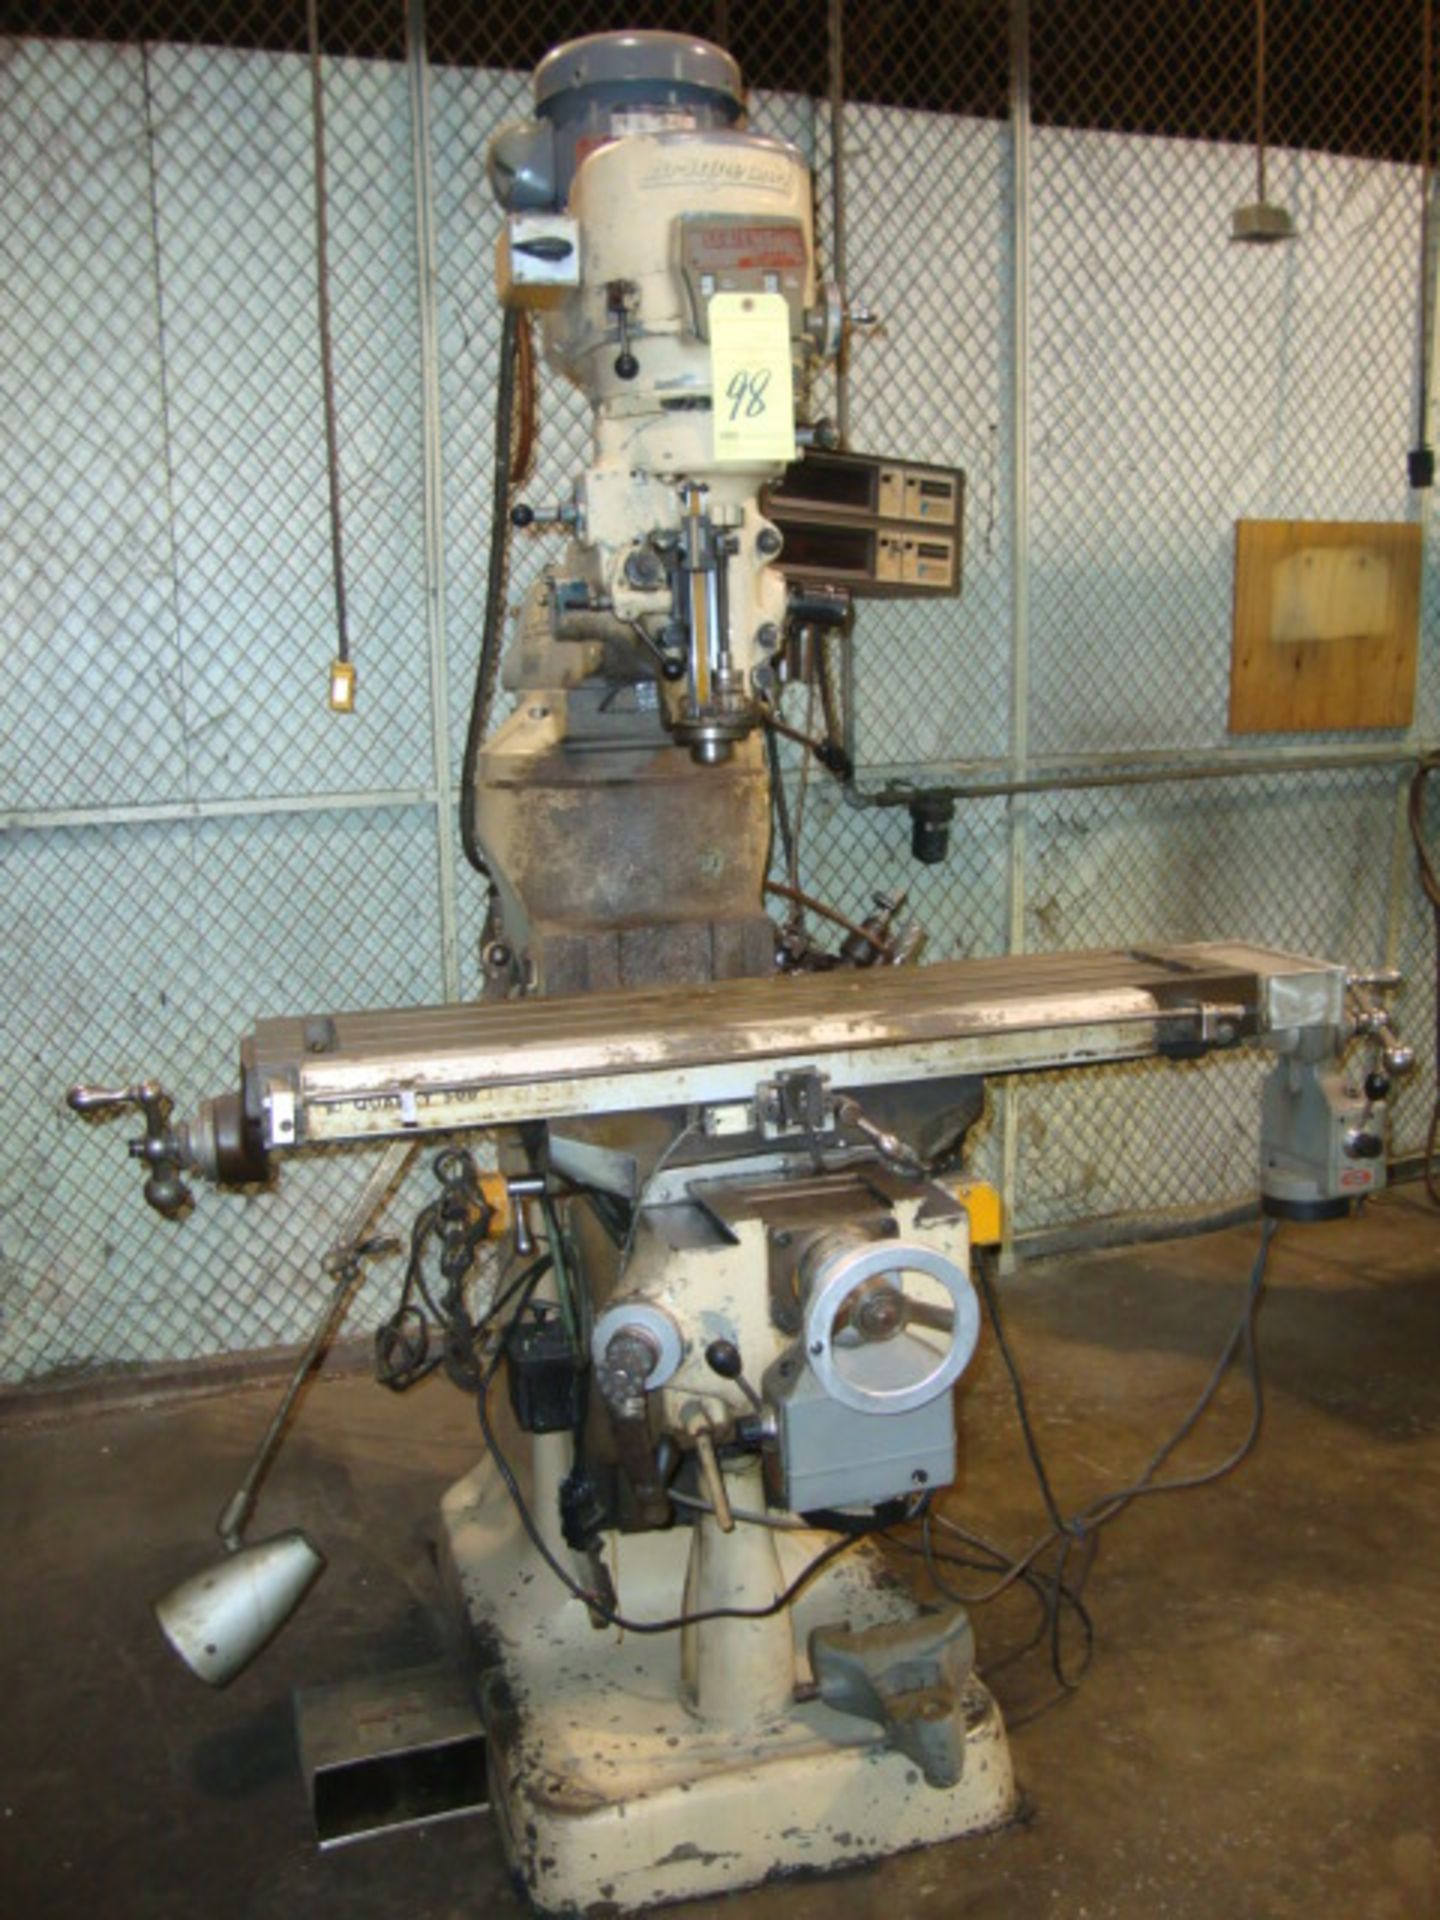 TURRET TYPE VERTICAL MILL, BRIDGEPORT SERIES 1, 9" x 42" table, chrome ways, 2-axis D.R.O., - Image 2 of 2